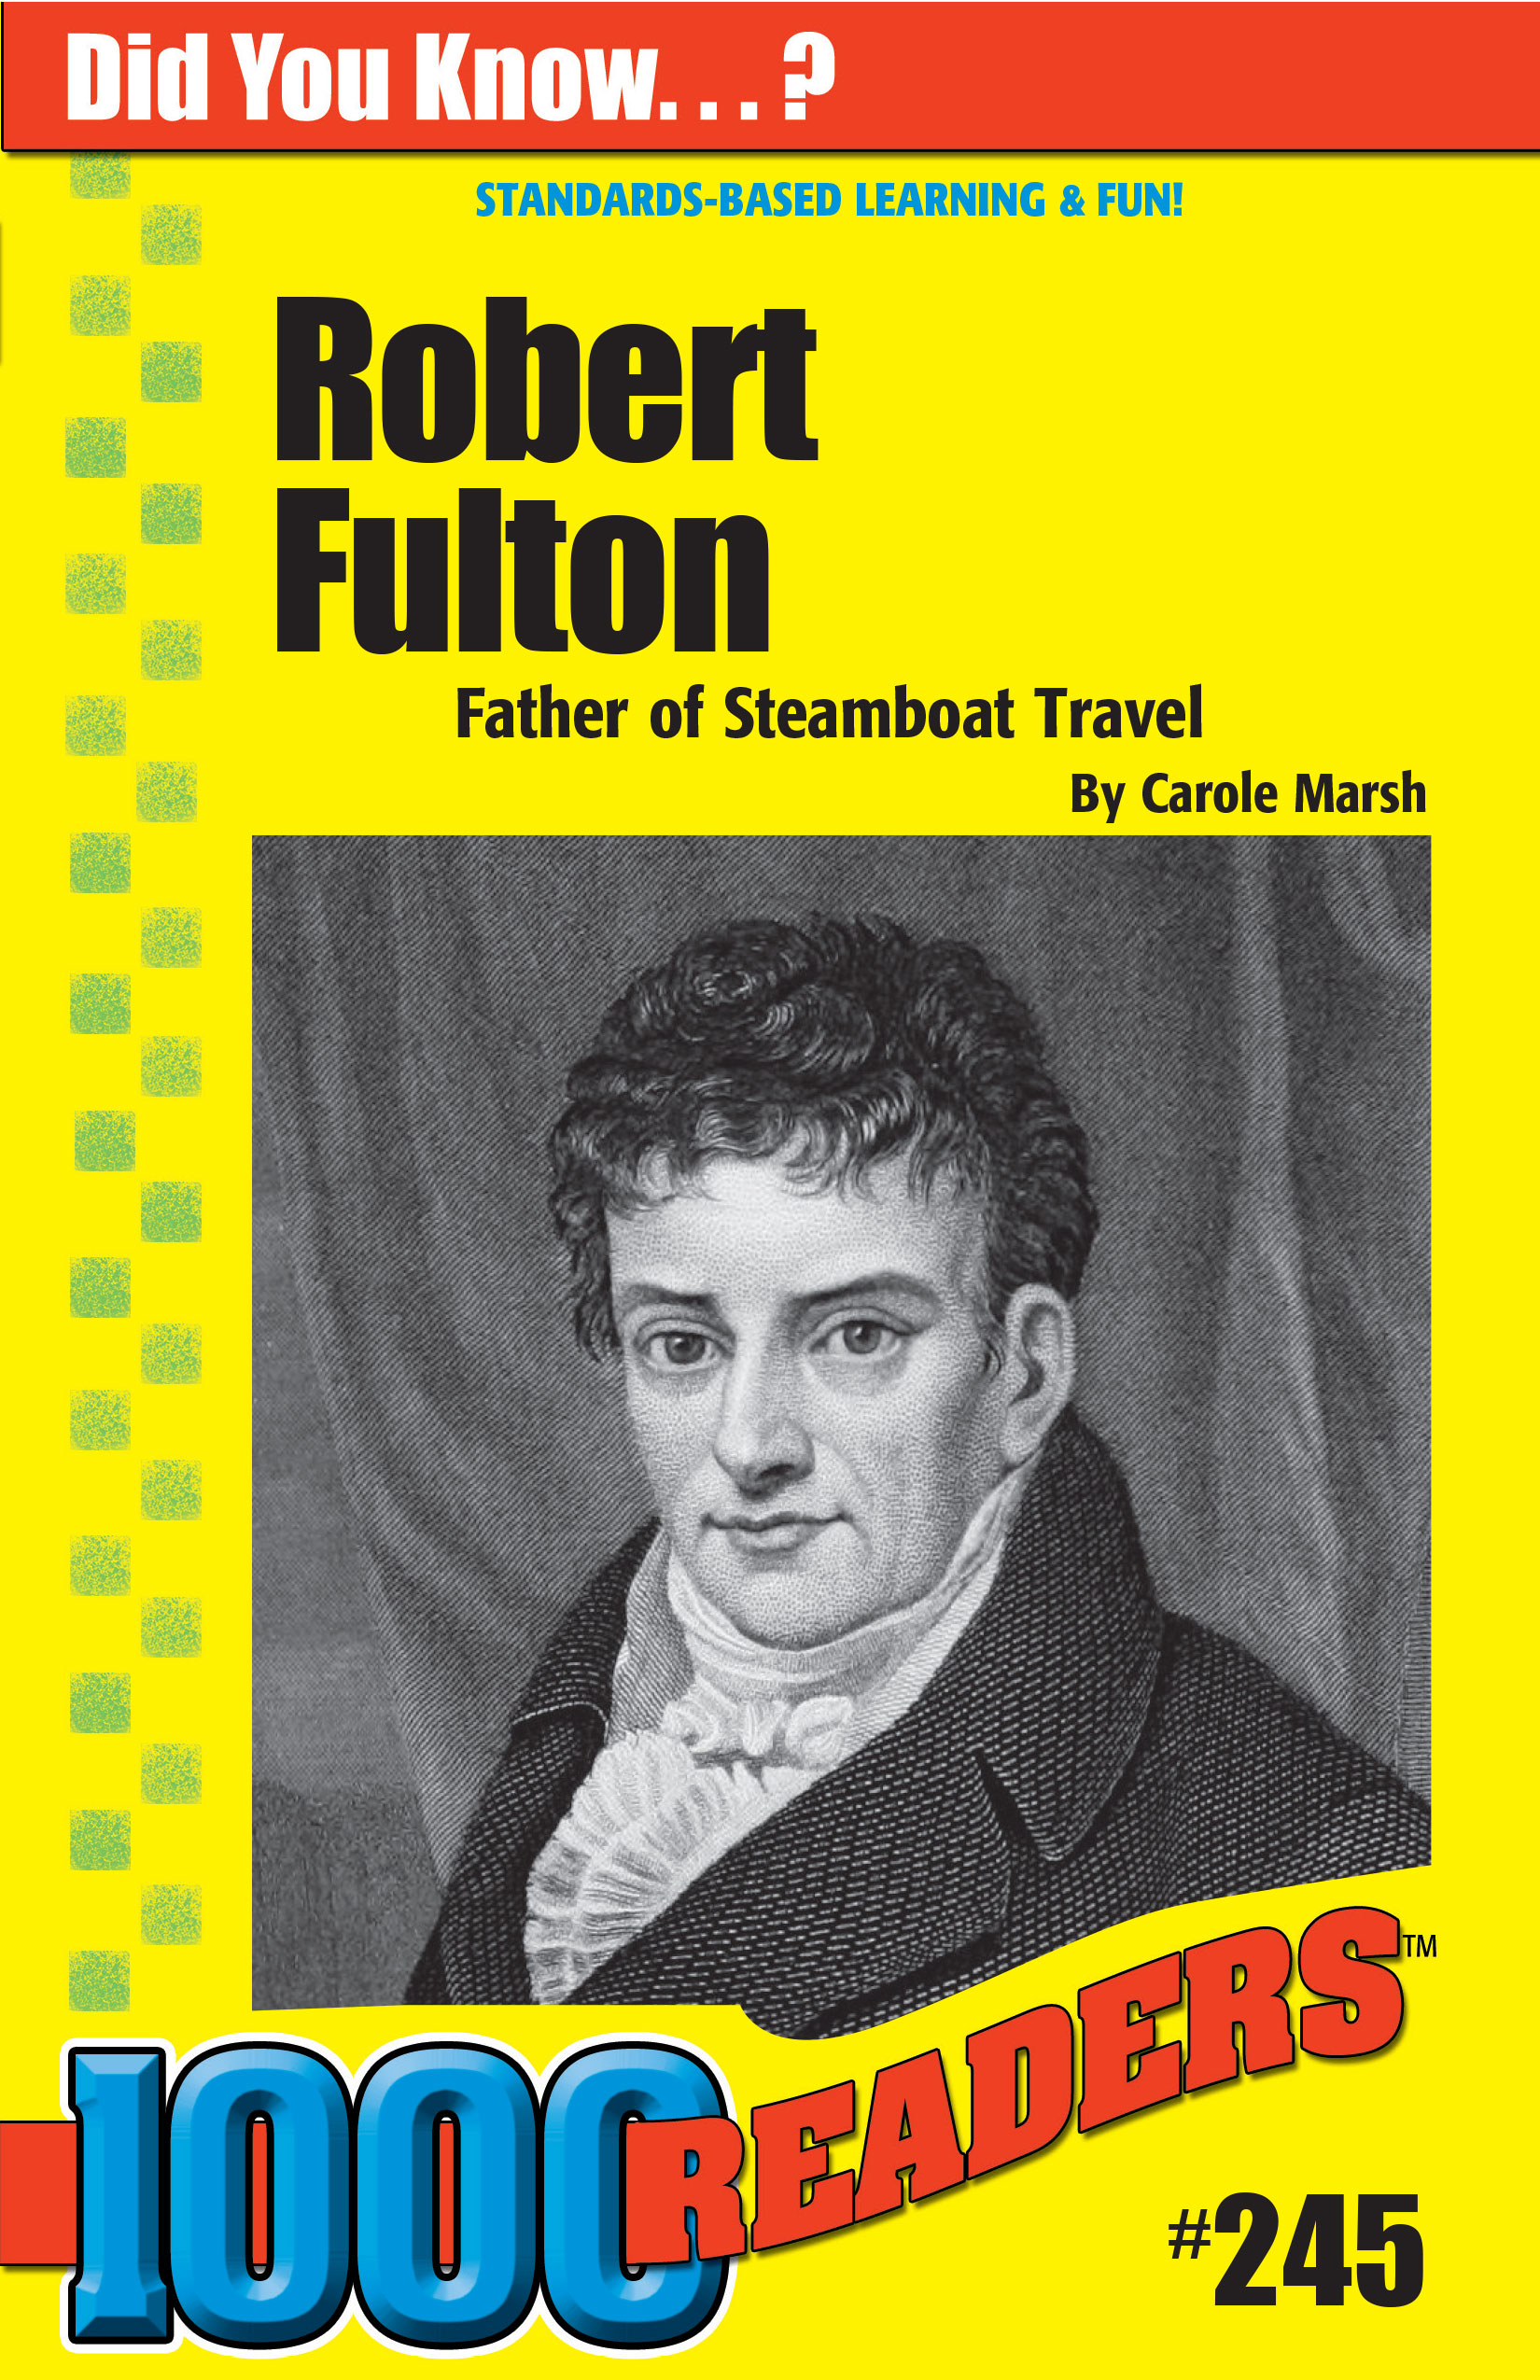 Robert Fulton: Father of Steamboat Travel